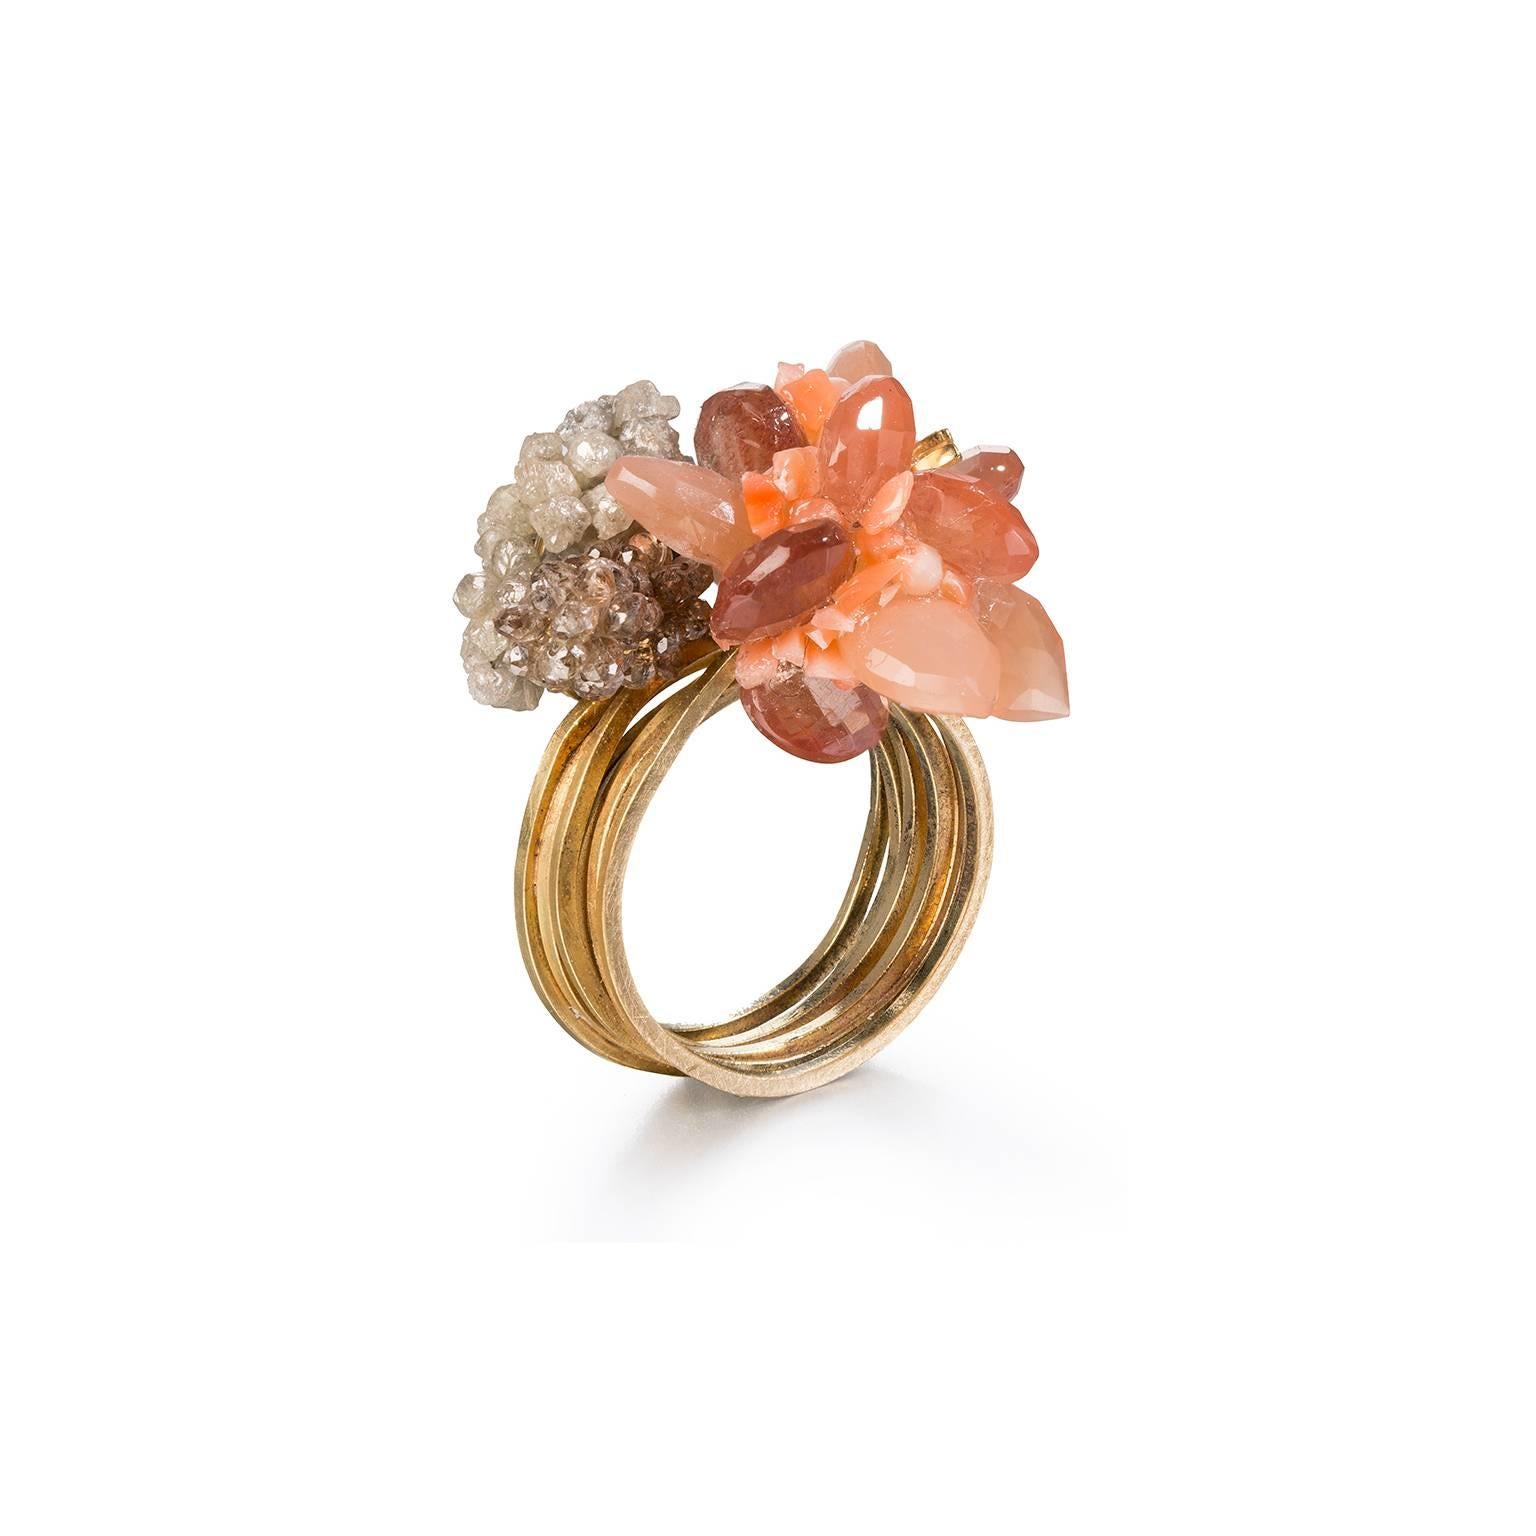 Unique sculptural 18t Gold Cocktail Ring by Donna Brennan. Featuring a star burst of Sun & Moonstones encrusted with crushed Coral, delicately framed by a swathe of cognac faceted Diamonds, and silver & black rough Diamonds. 7 ring shanks in approx.